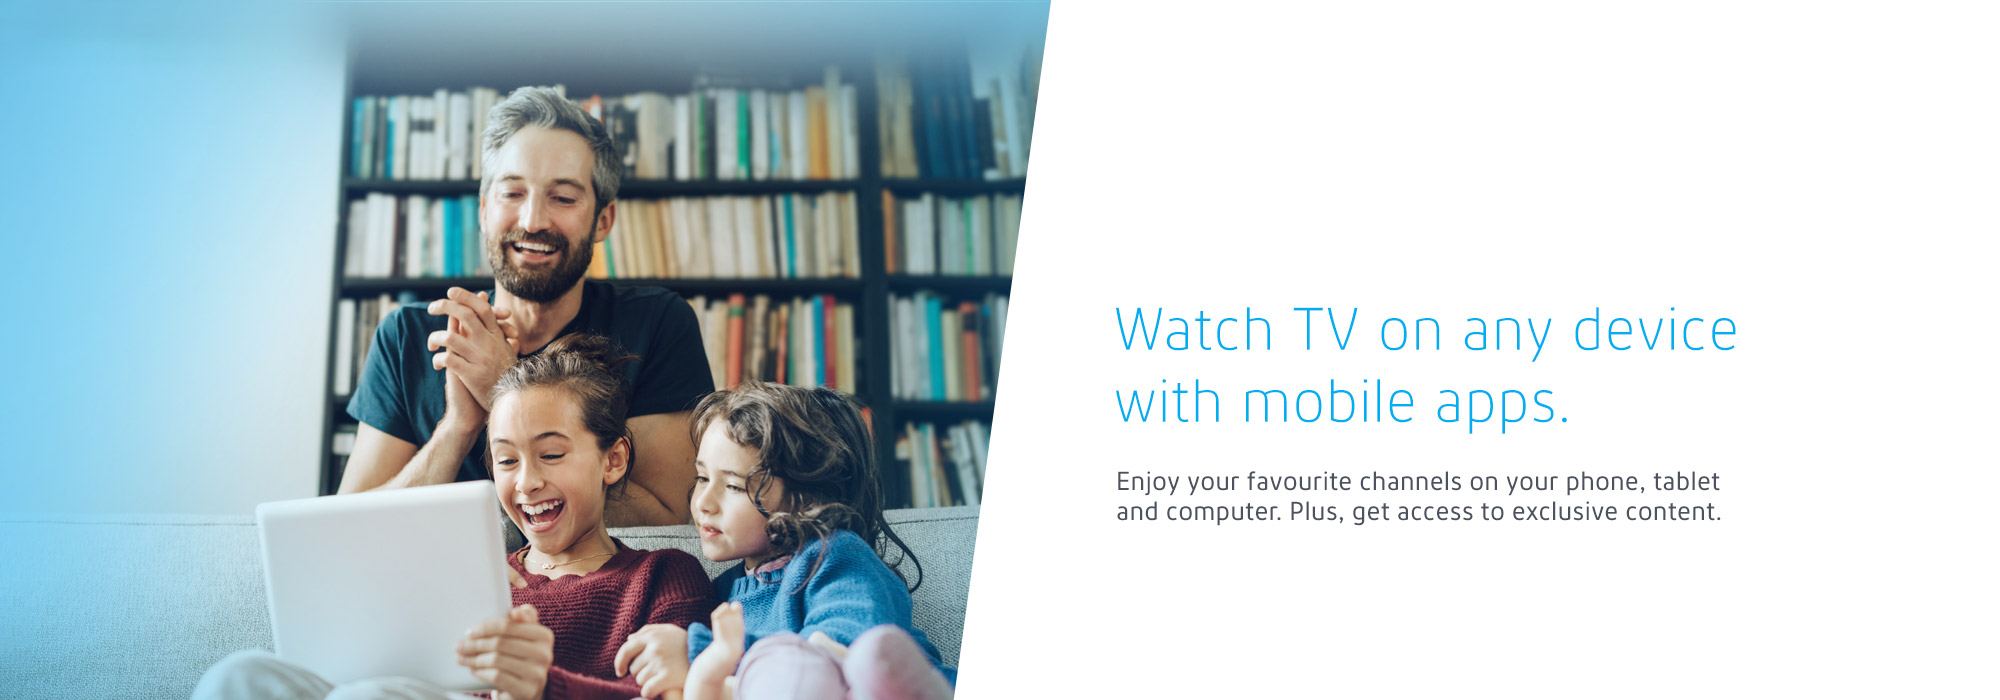 Watch TV on any device with mobile apps. Enjoy your favourite channels on your phone, tablet and computer. Plus, get access to exclusive content.